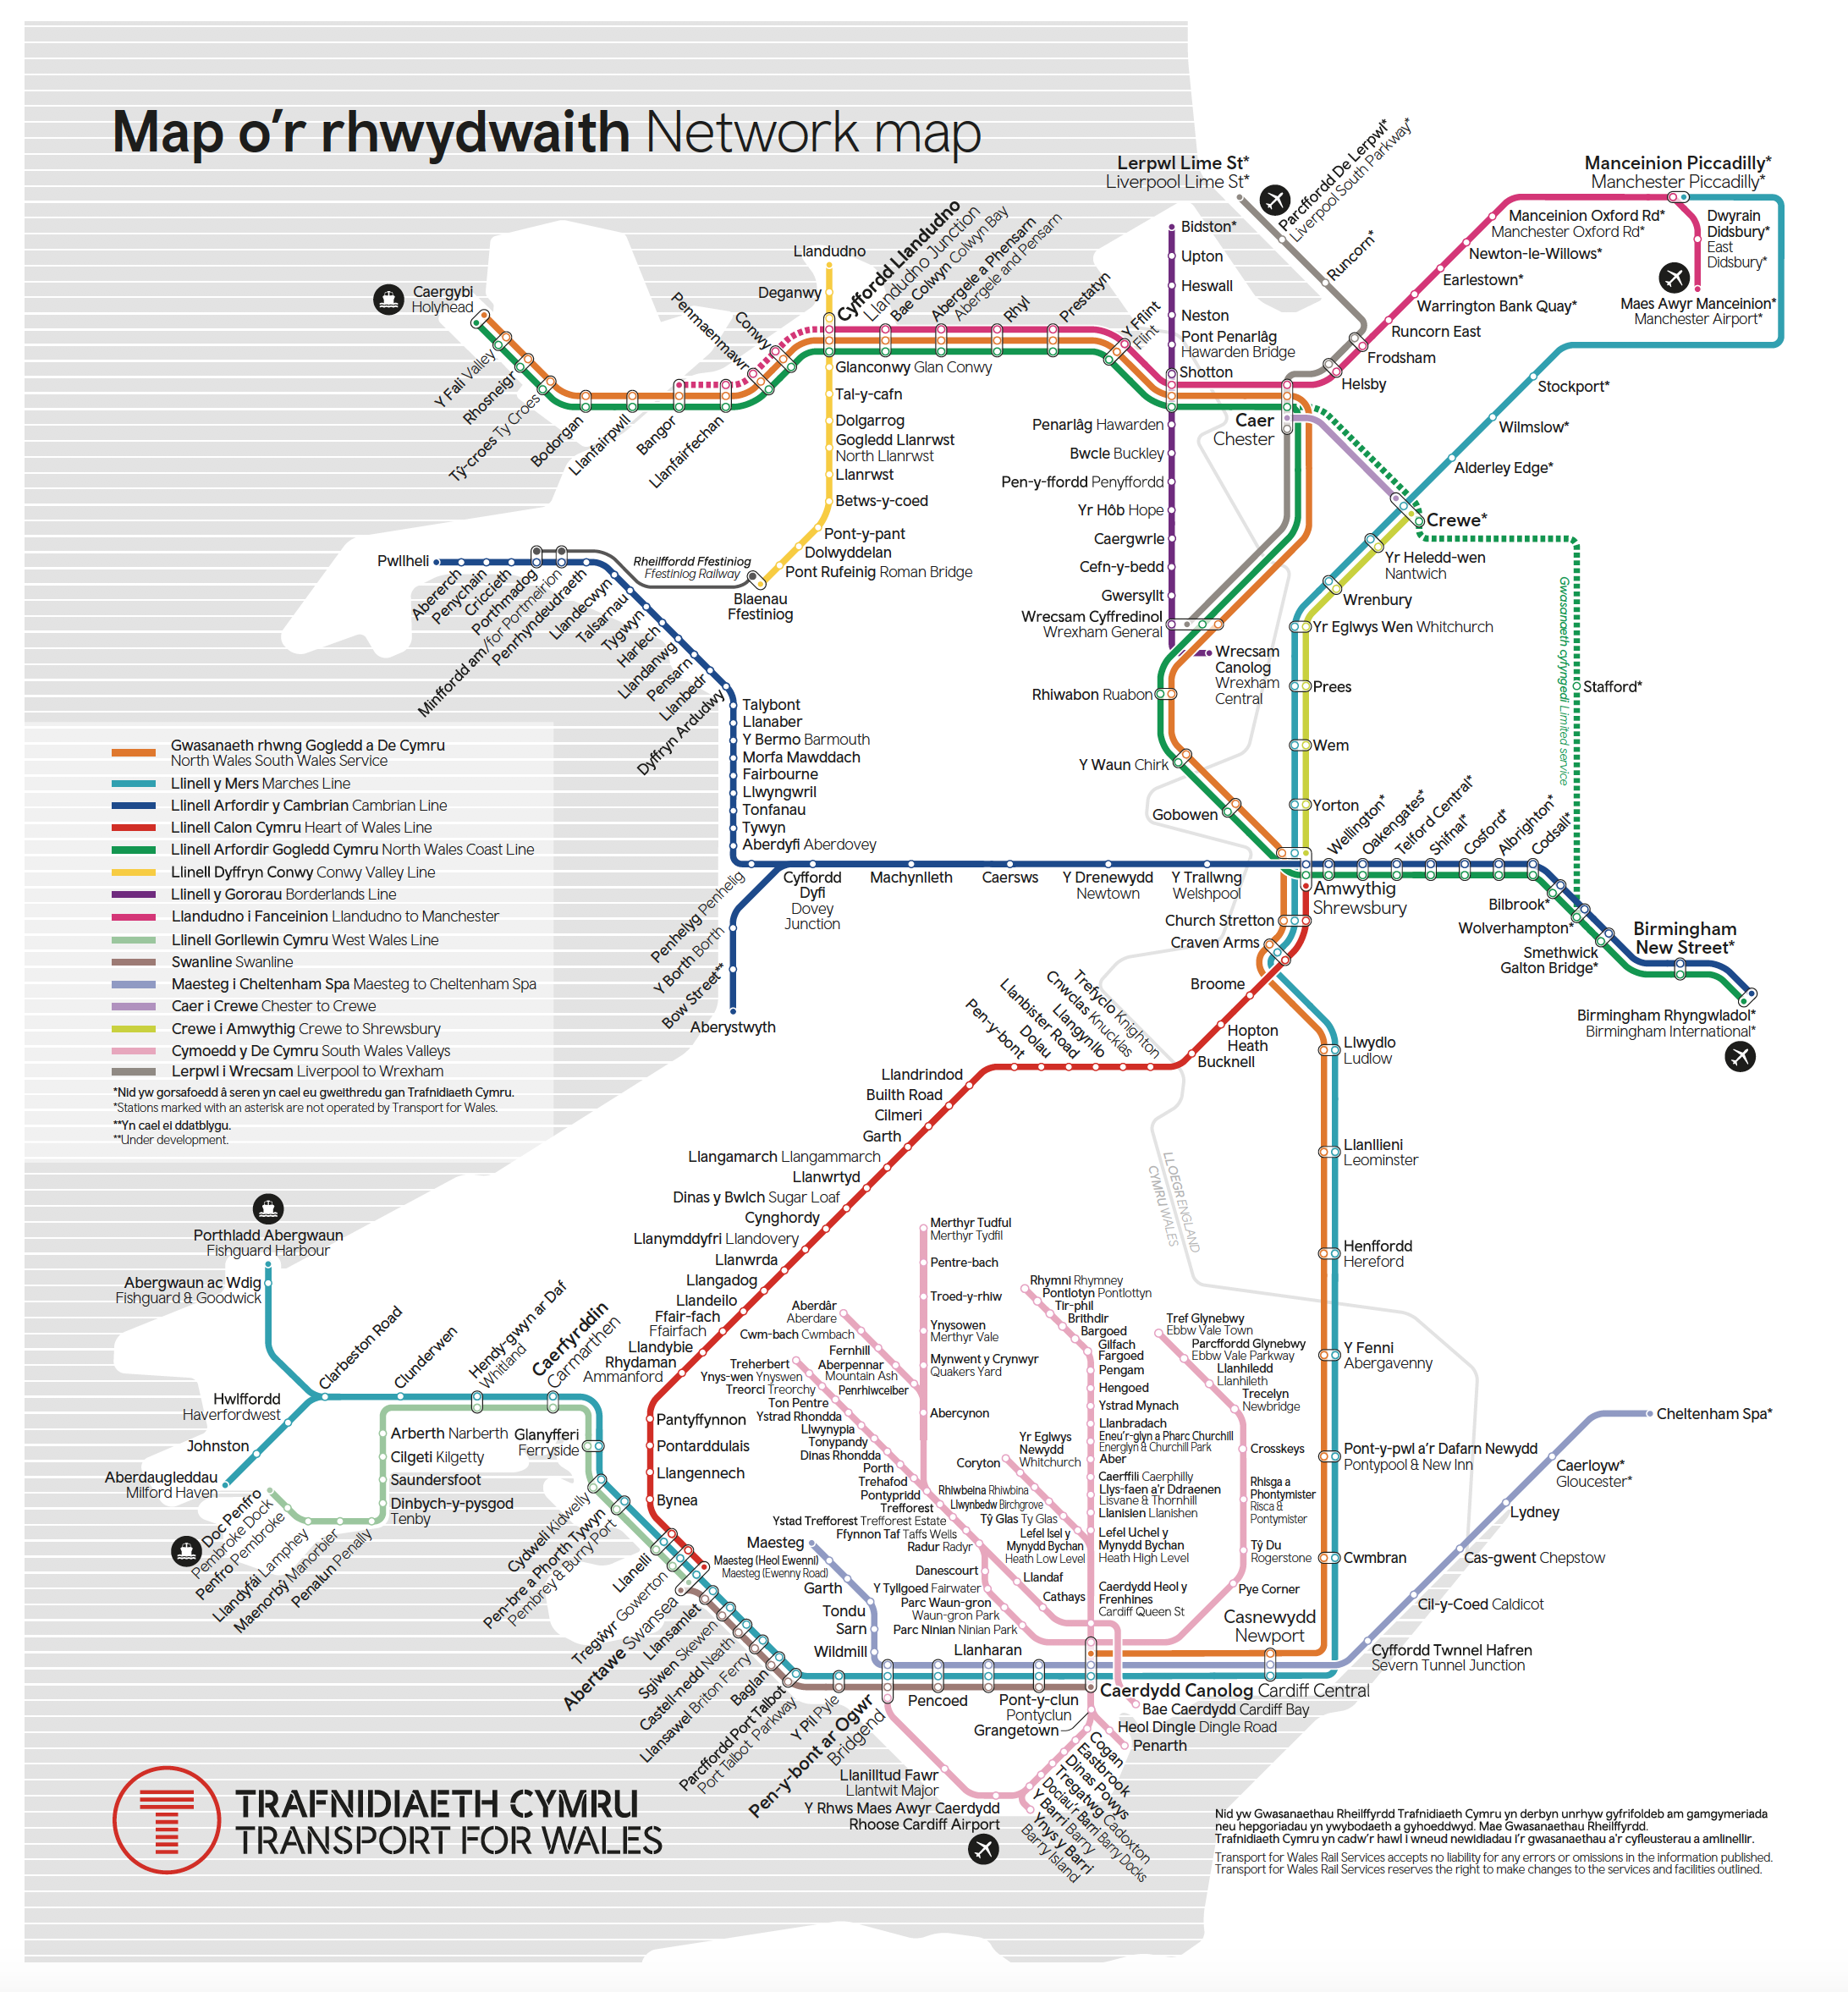 Map of the Transport for Wales (TfW) rail network